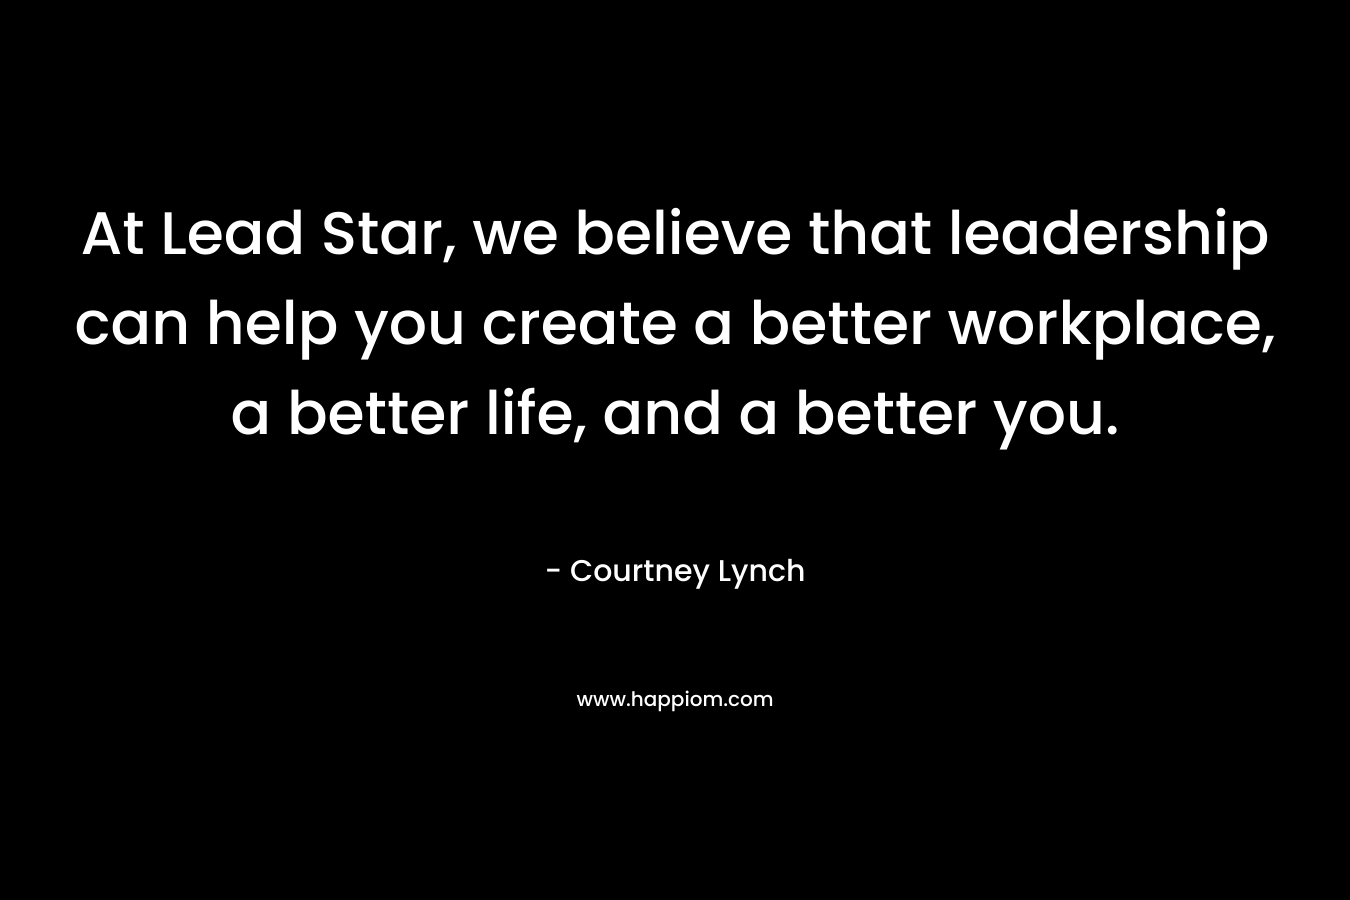 At Lead Star, we believe that leadership can help you create a better workplace, a better life, and a better you. – Courtney Lynch